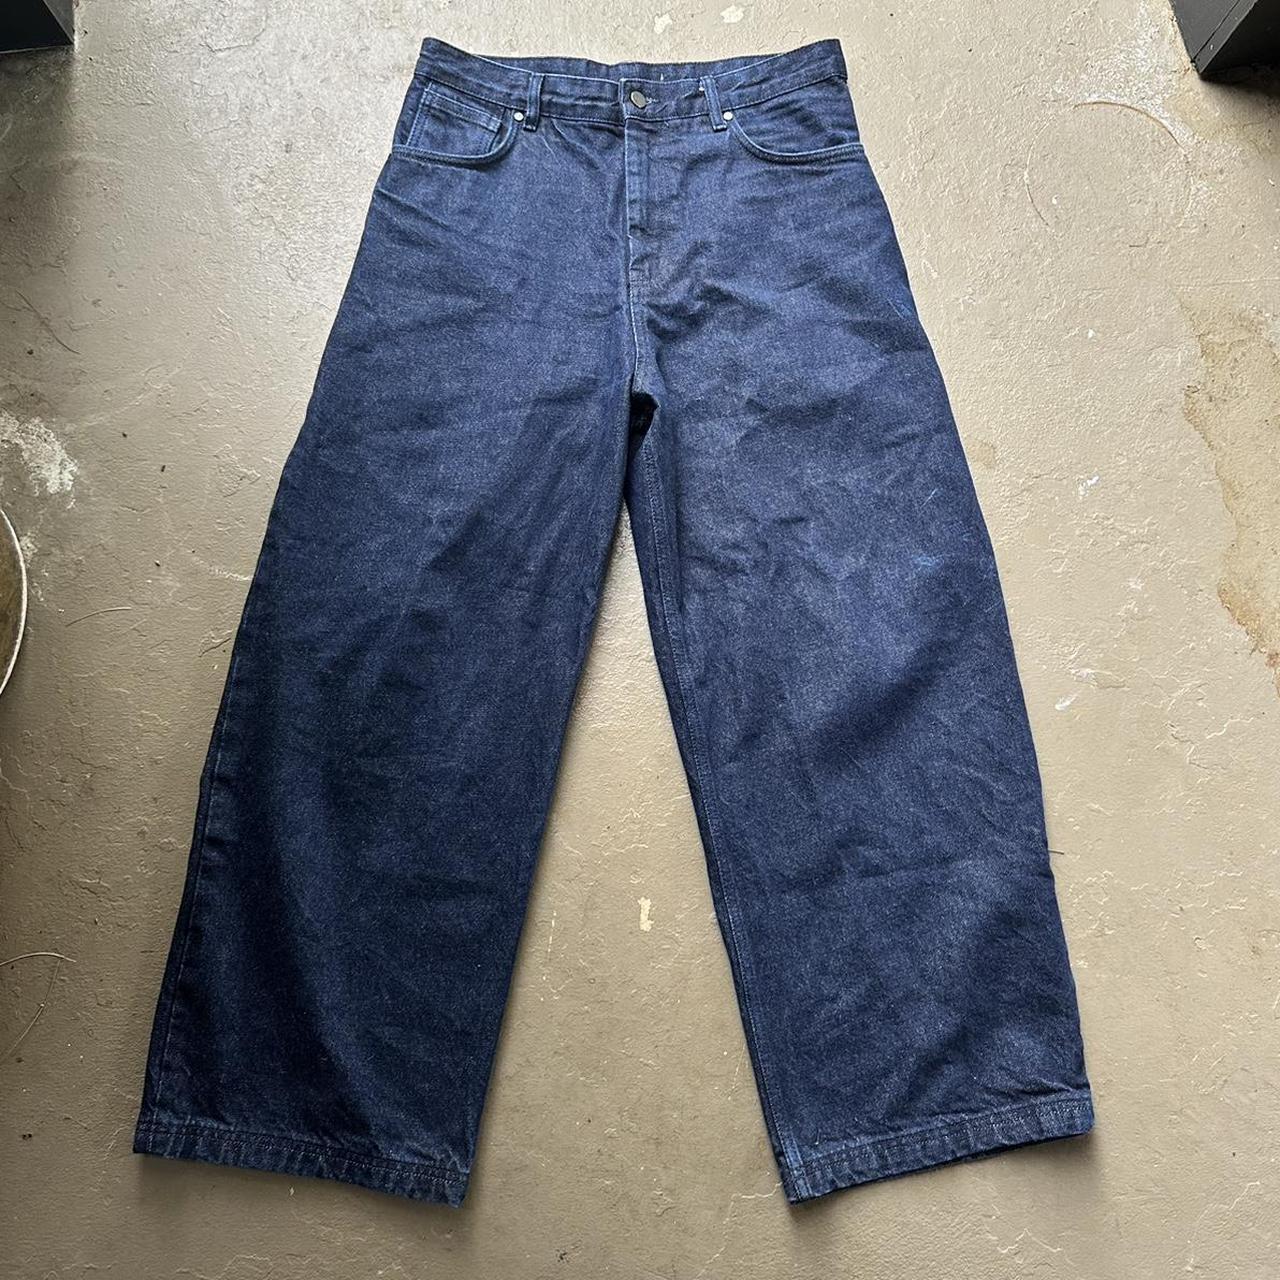 darkwash jeans Sized 30x32 Really cool pants and... - Depop